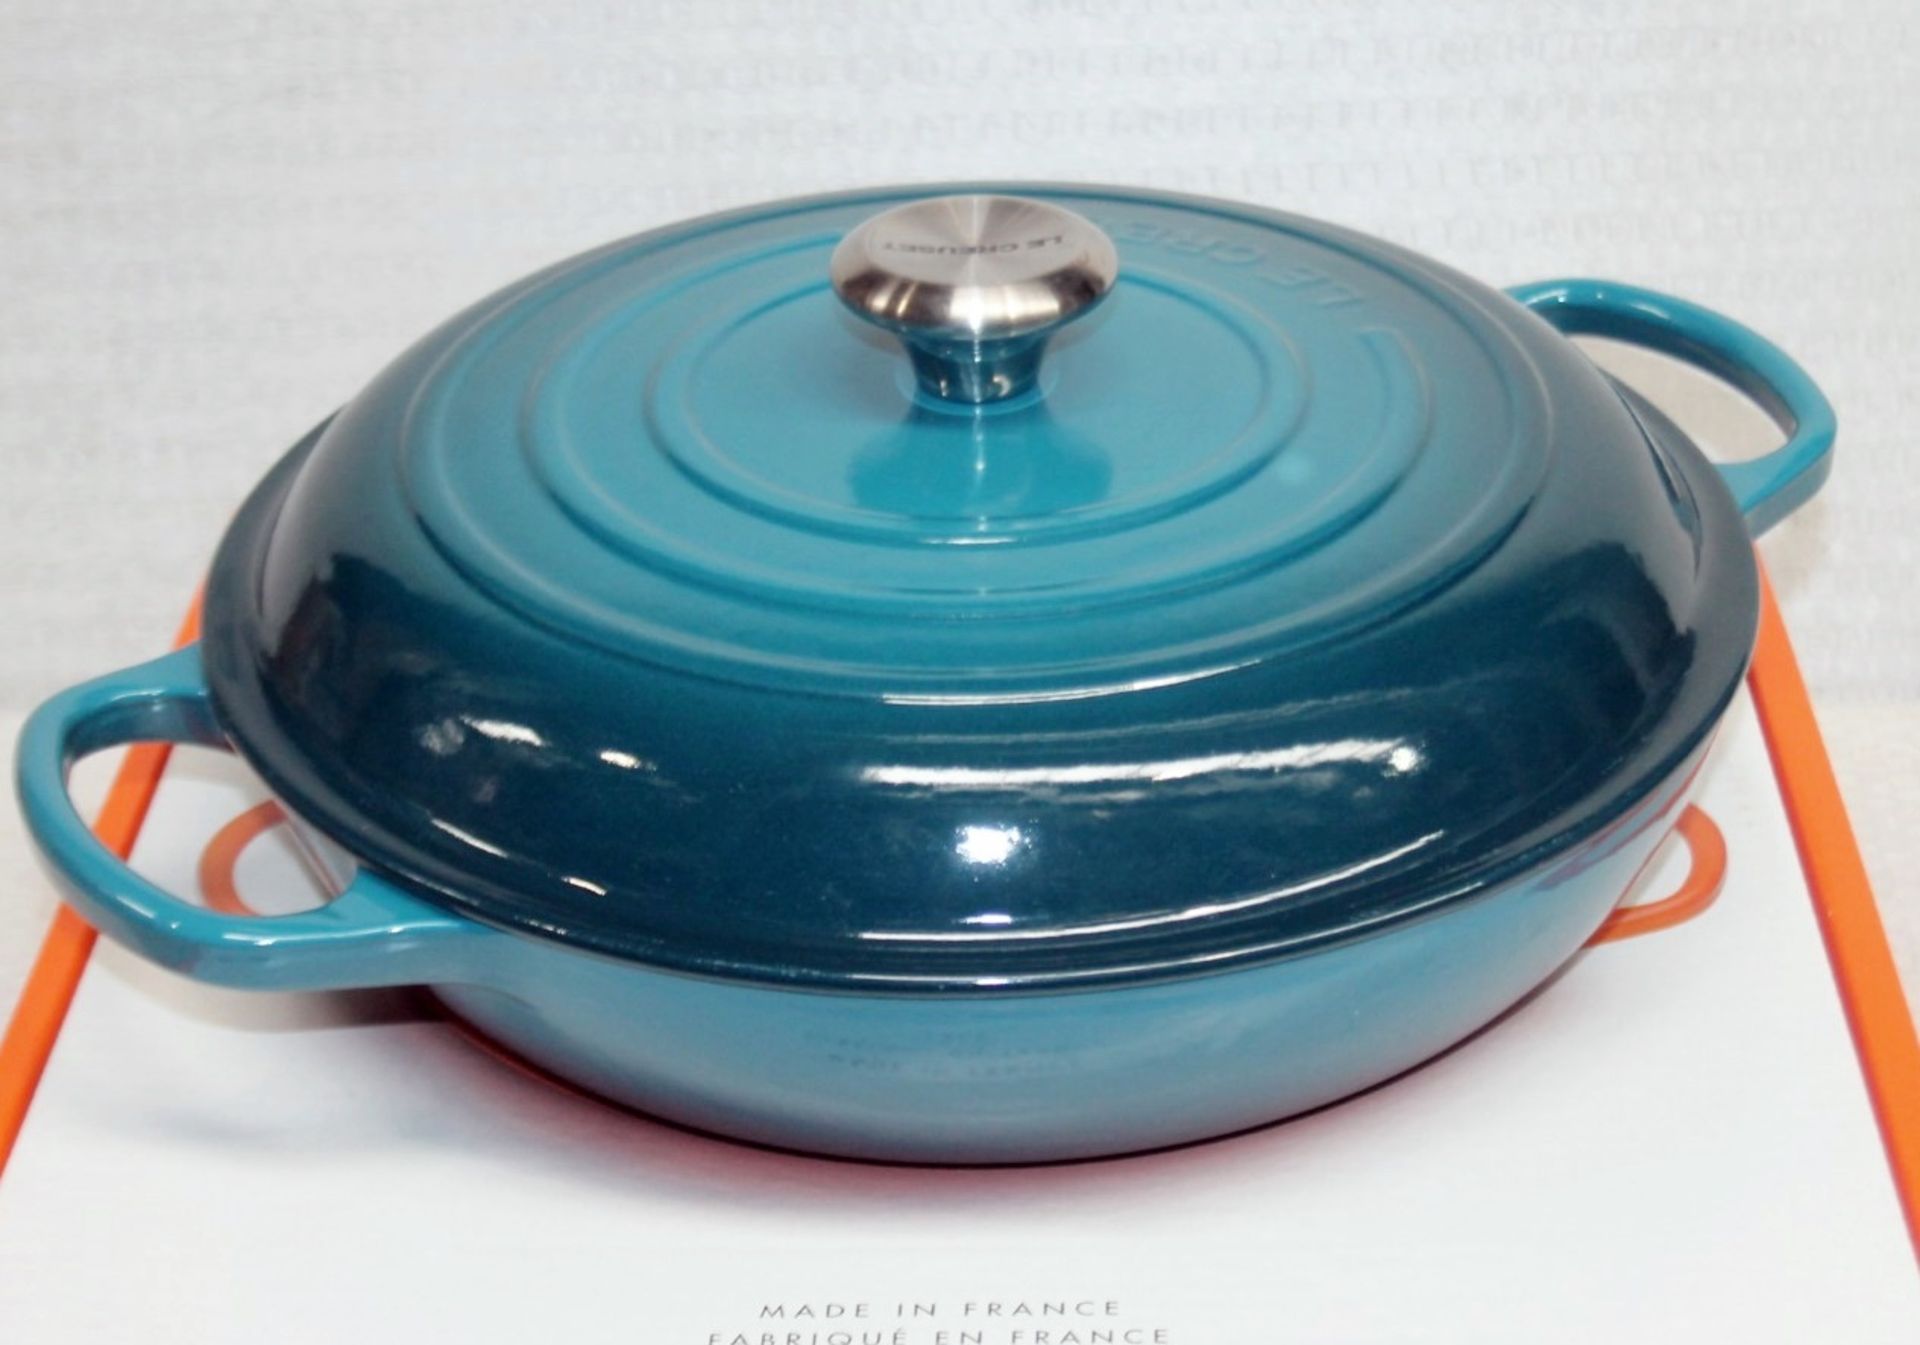 1 x LE CREUSET 'Signature' Enamelled Cast Iron Shallow Casserole Dish In Teal - RRP £270.00 - Image 3 of 13